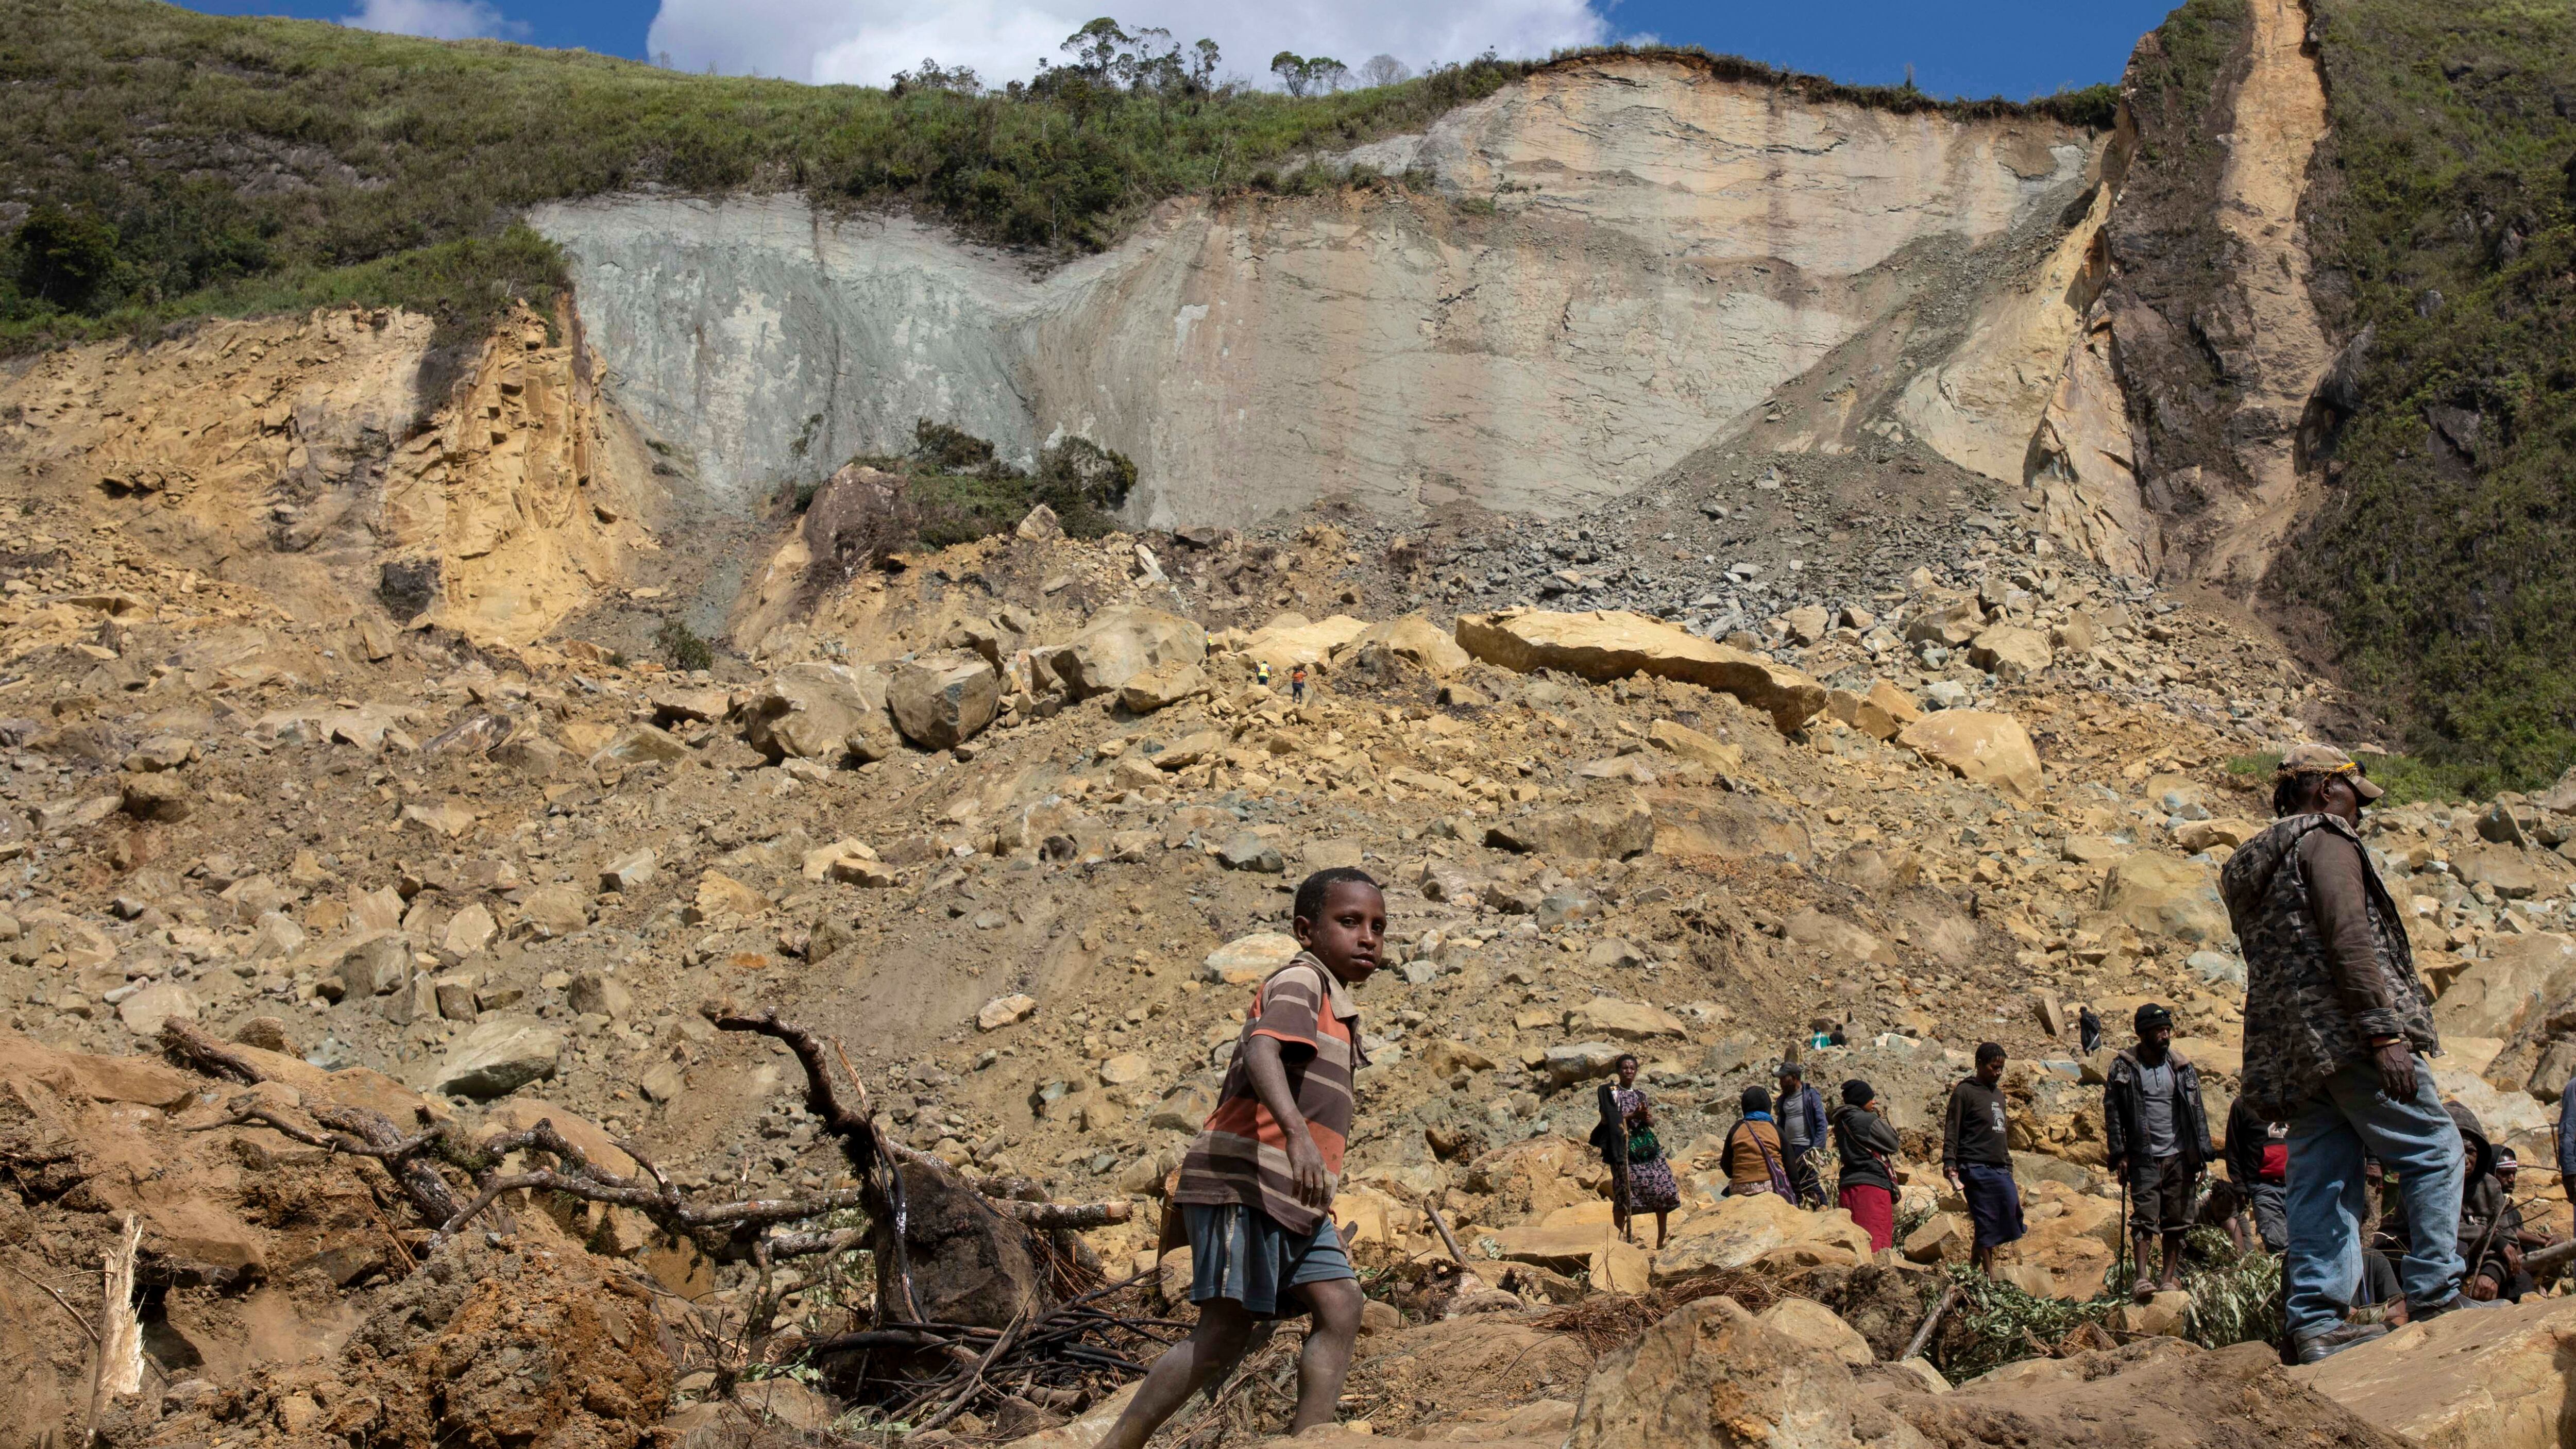 Villagers search through a landslide in Yambali in Papua New Guinea (Juho Valta/UNDP Papua New Guinea via AP)